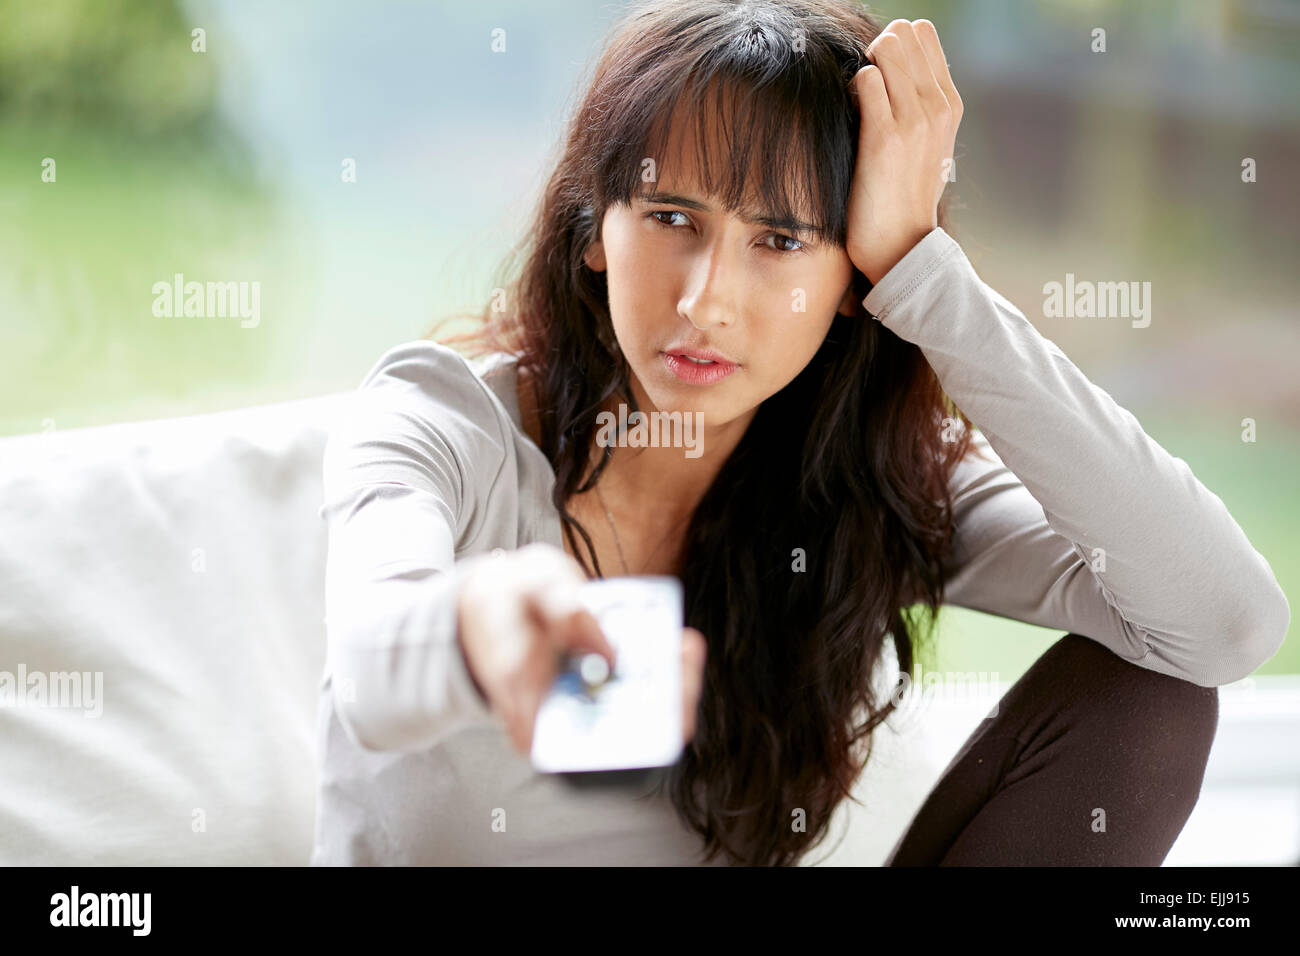 Bore teenager with tv remote Stock Photo